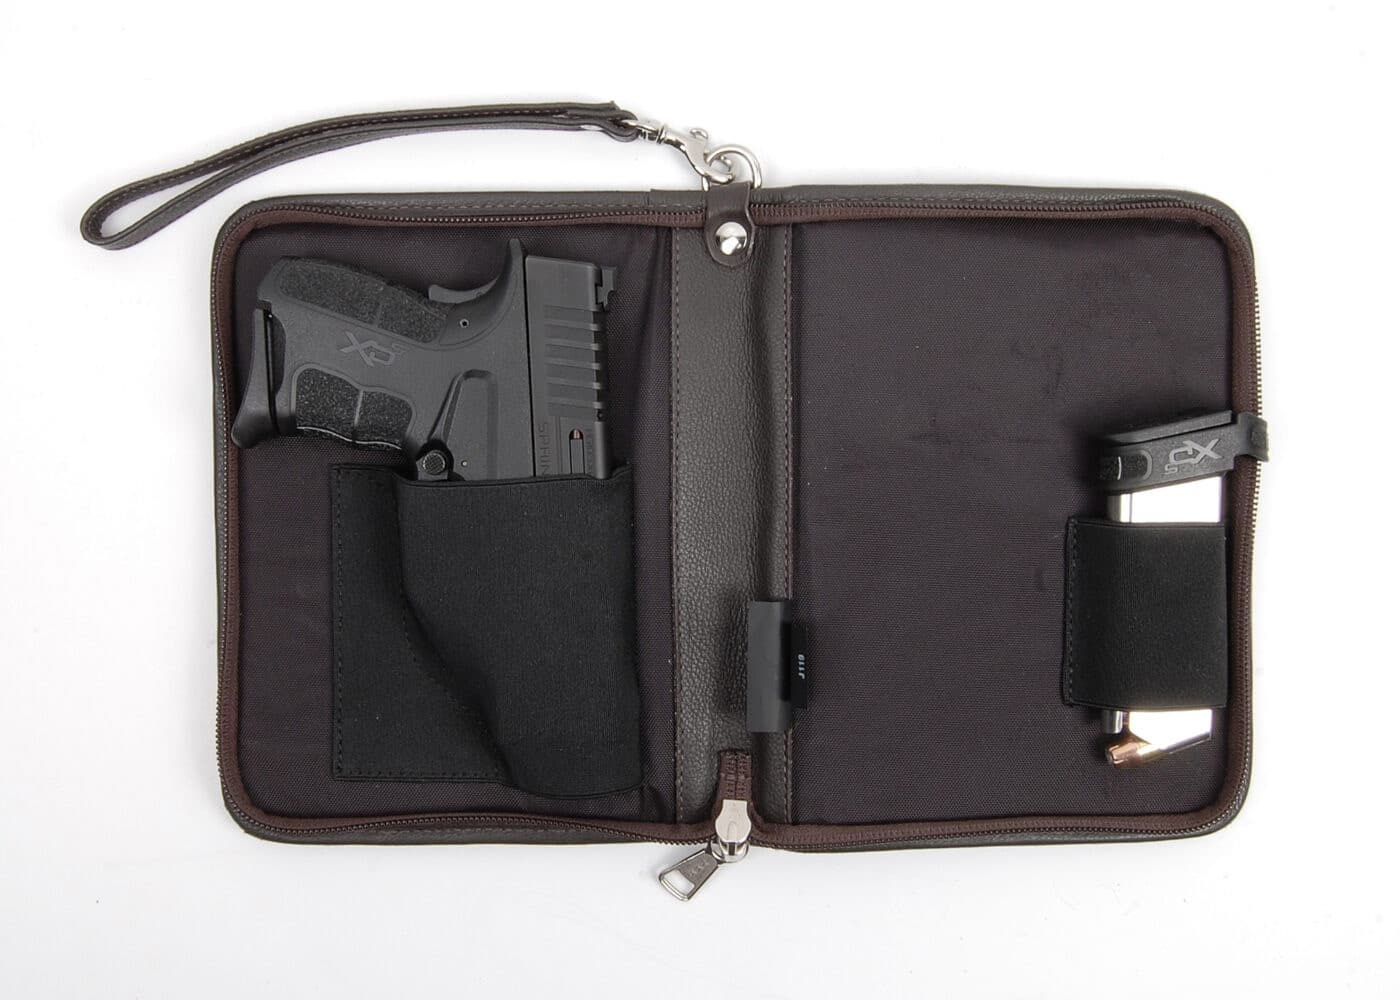 Galco Defense Planner for concealed carry in a car